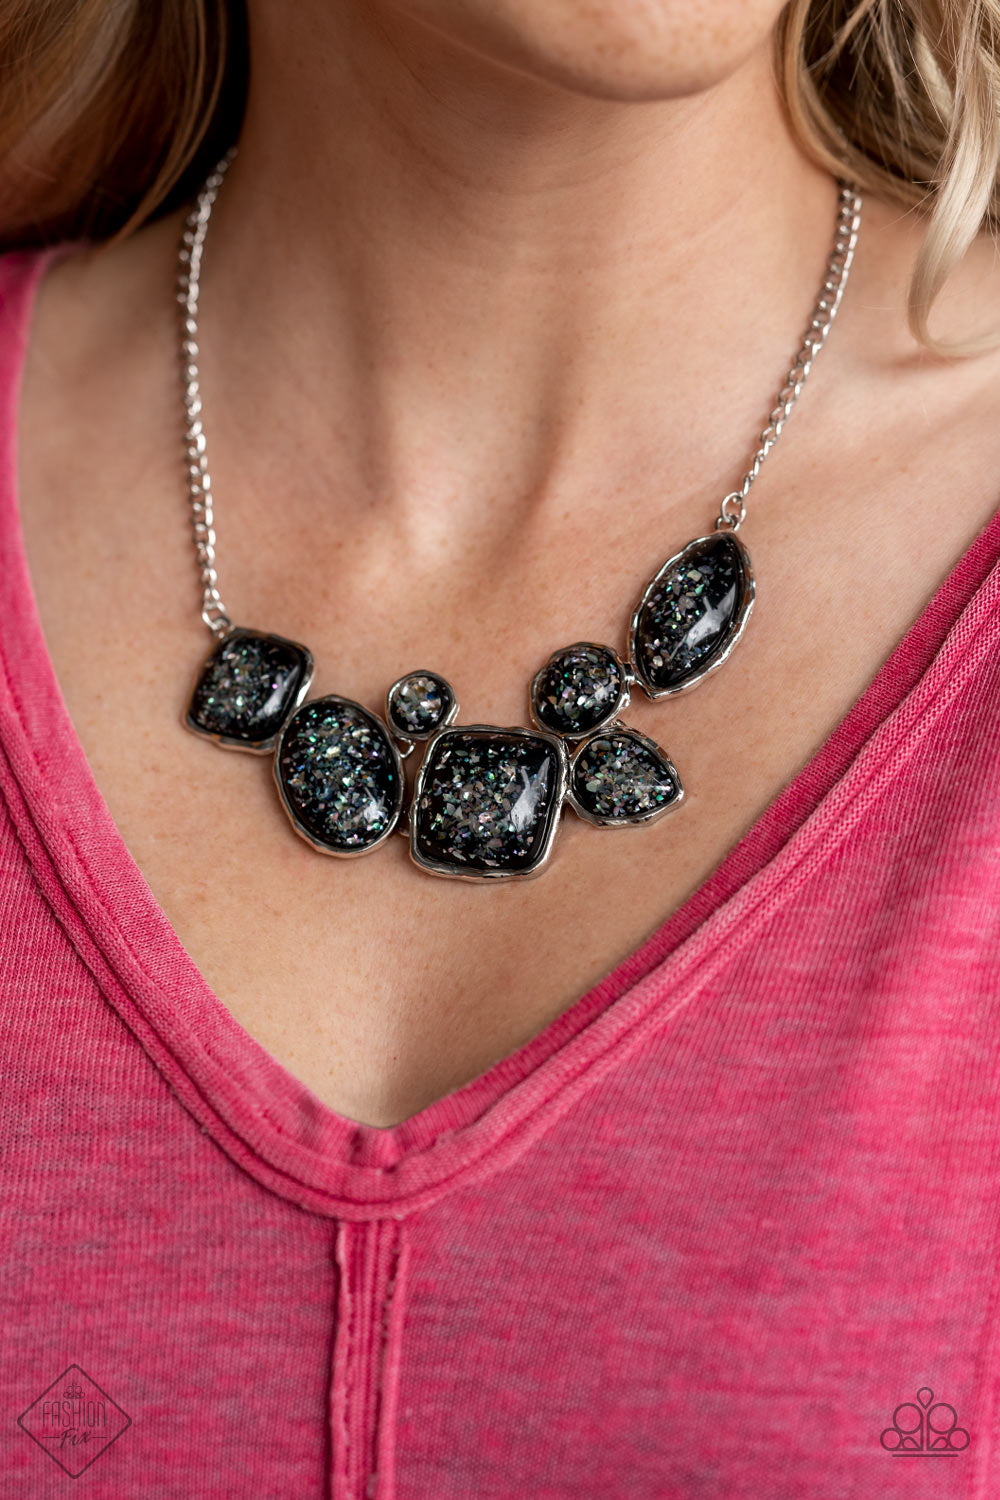 So Jelly - Black Necklace1395n